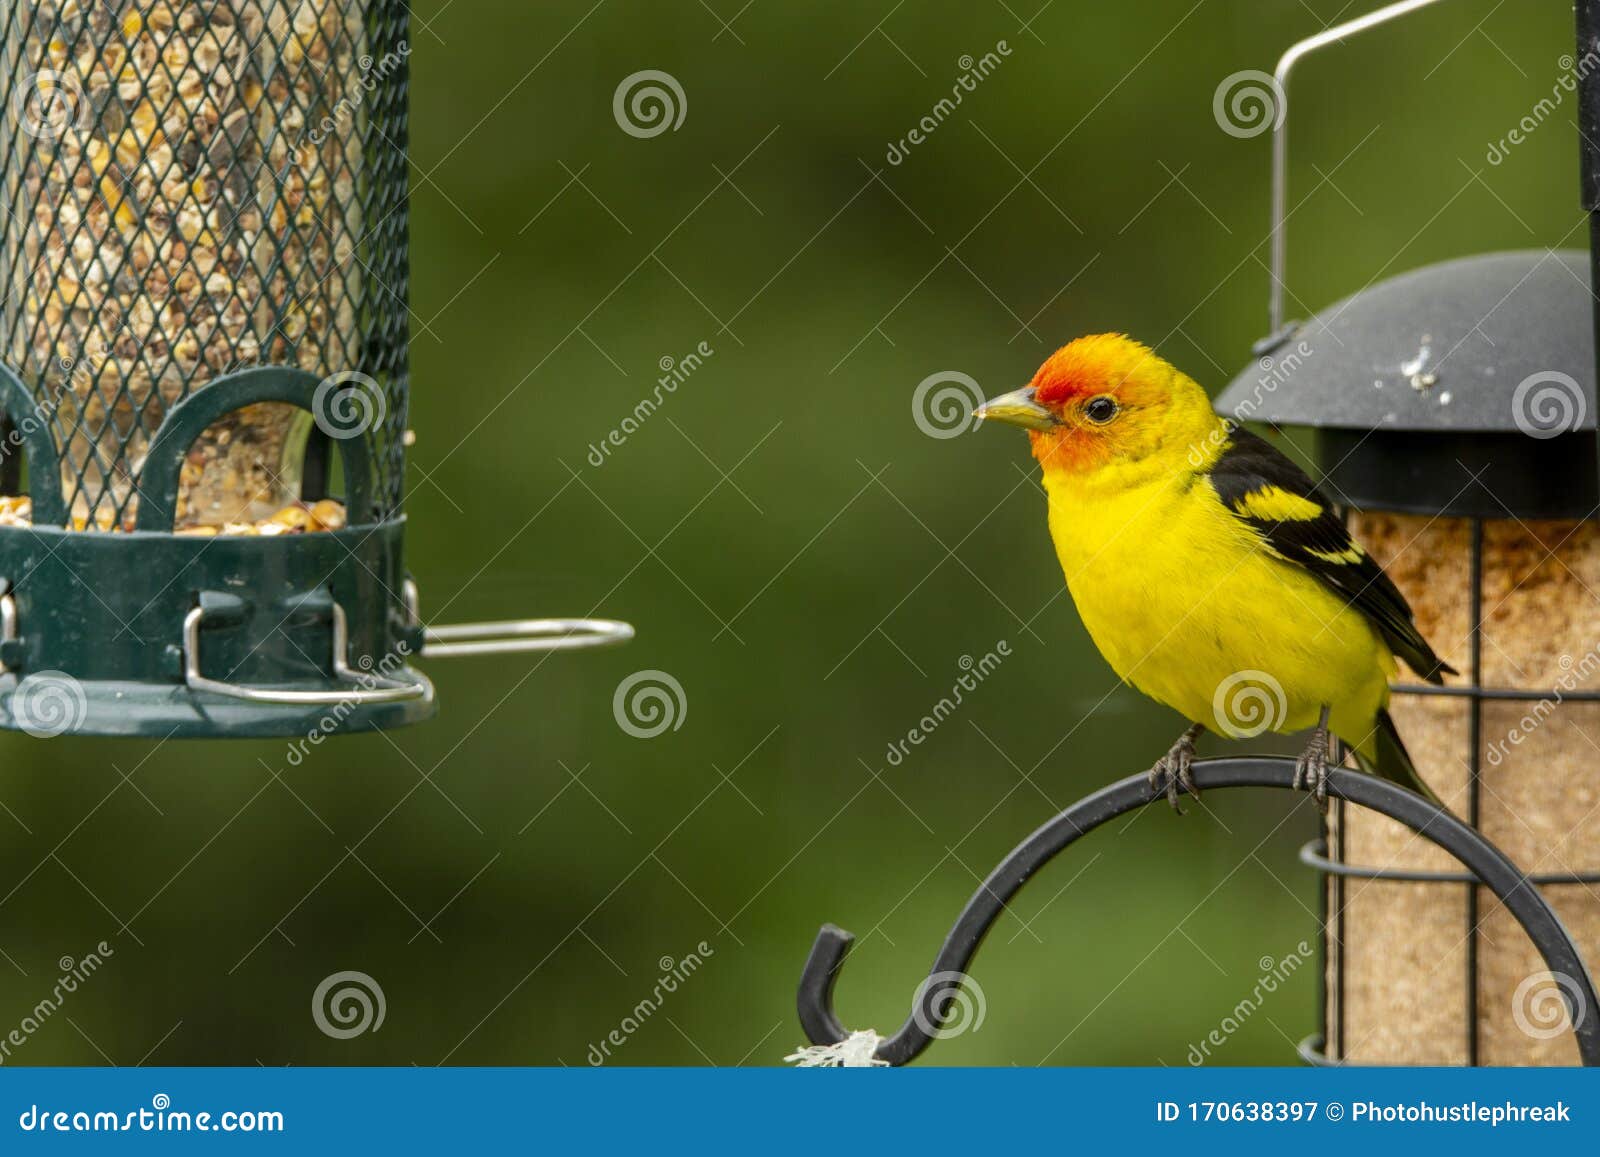 Male Western Tanager Perched on Bird Feeder Stock Image Image of